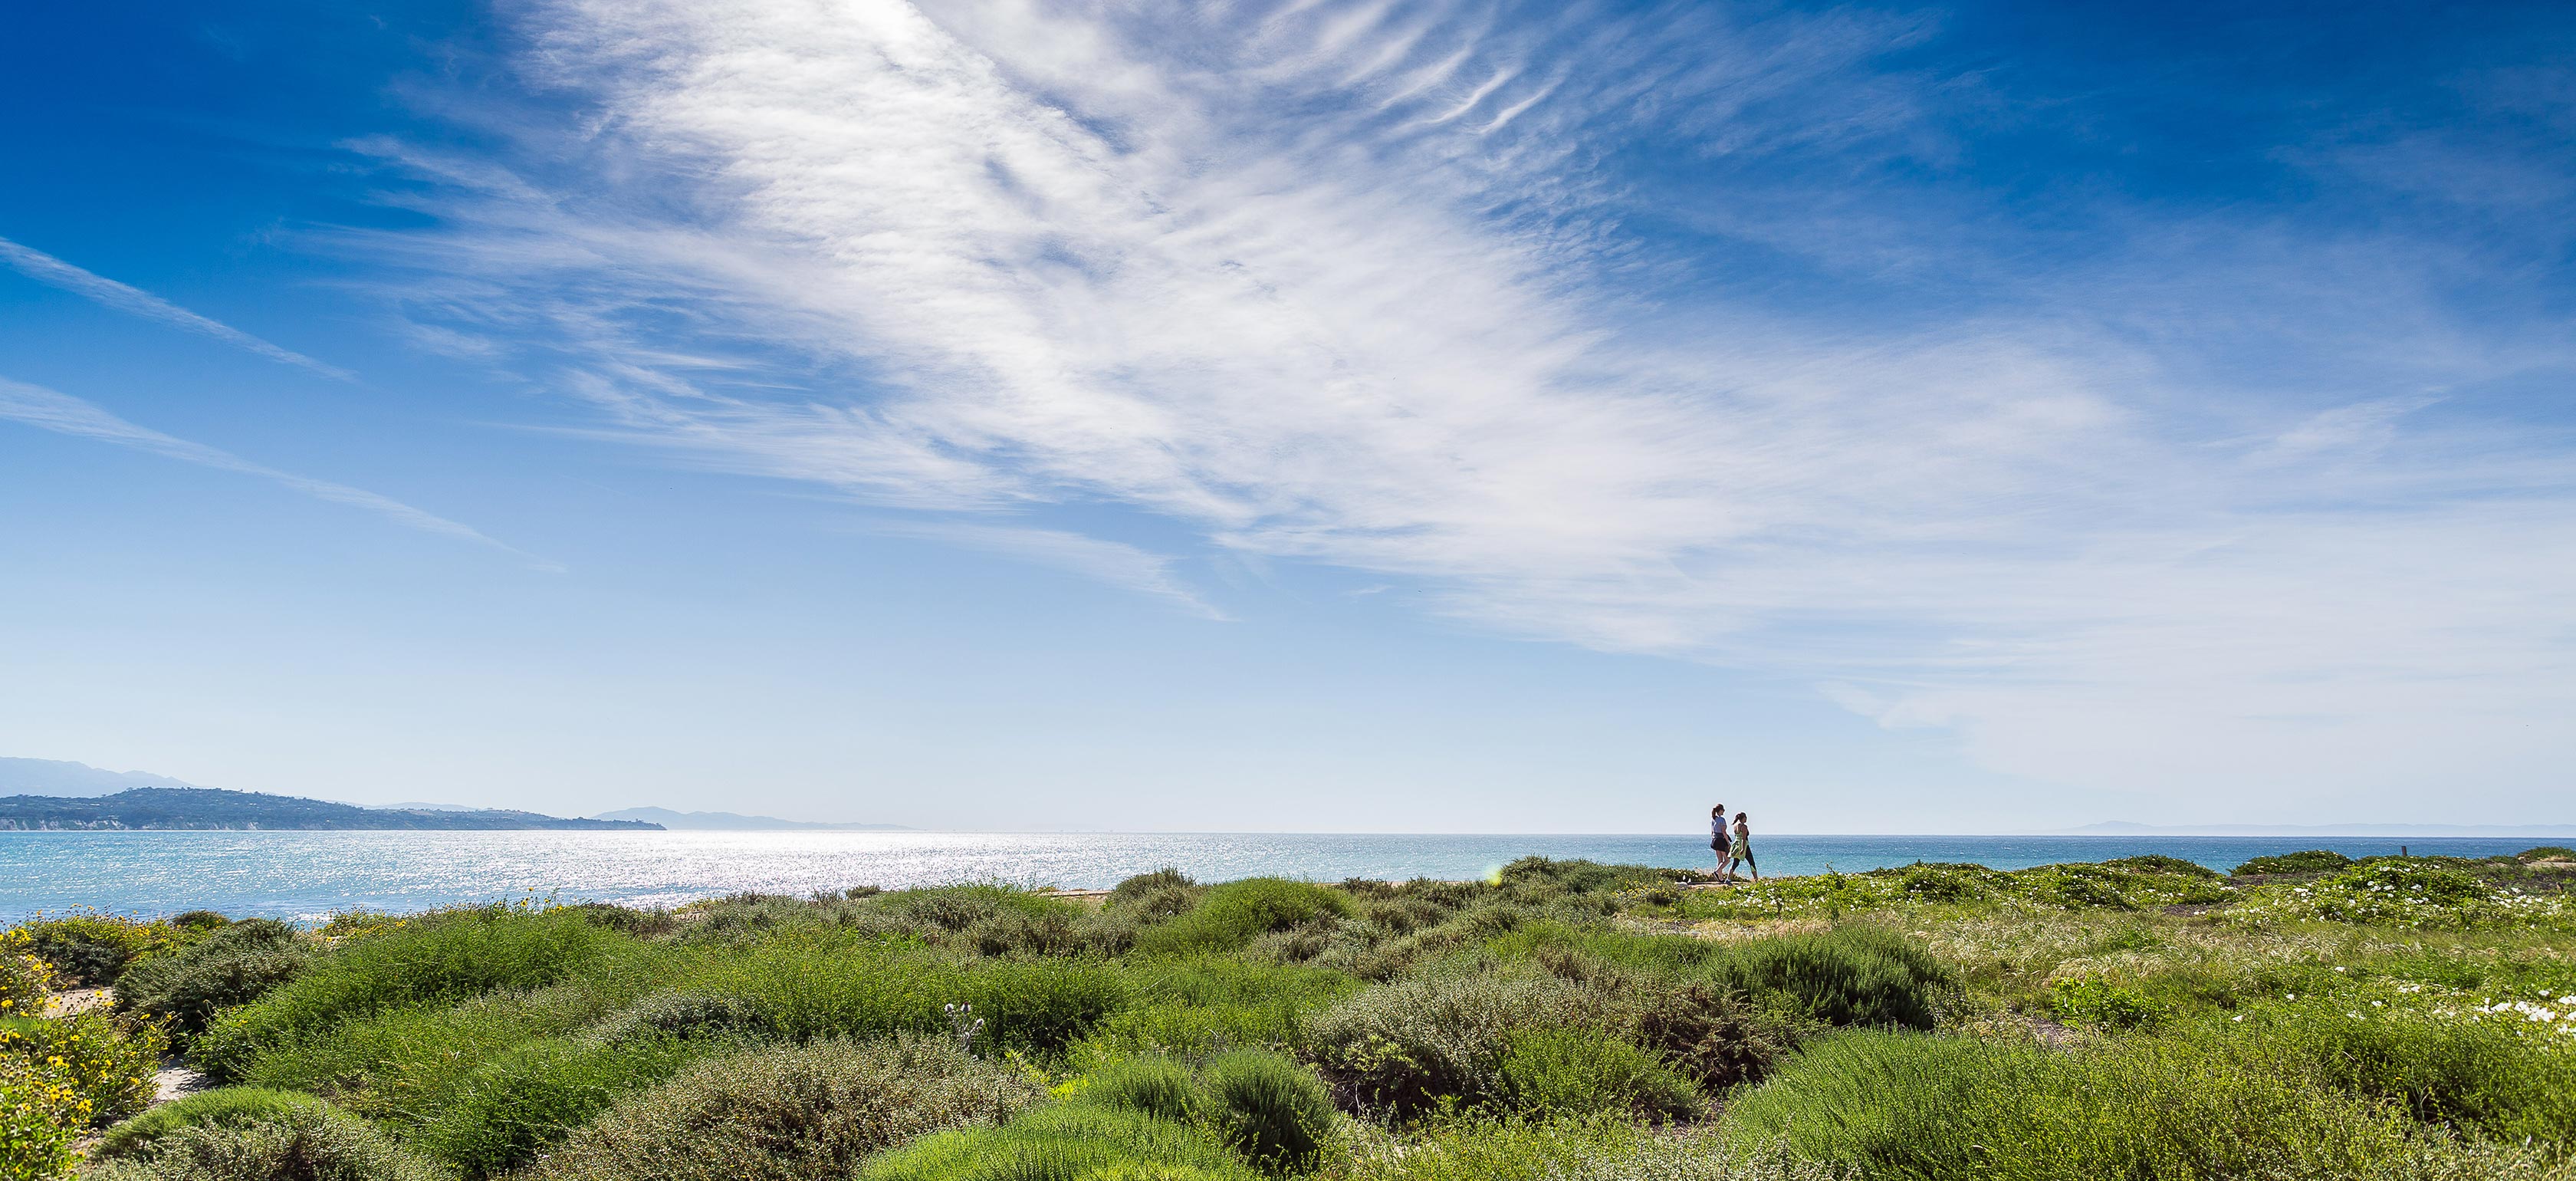 View of sky with streak of clouds with two people walking on cliff at the end of grassy area with ocean view 